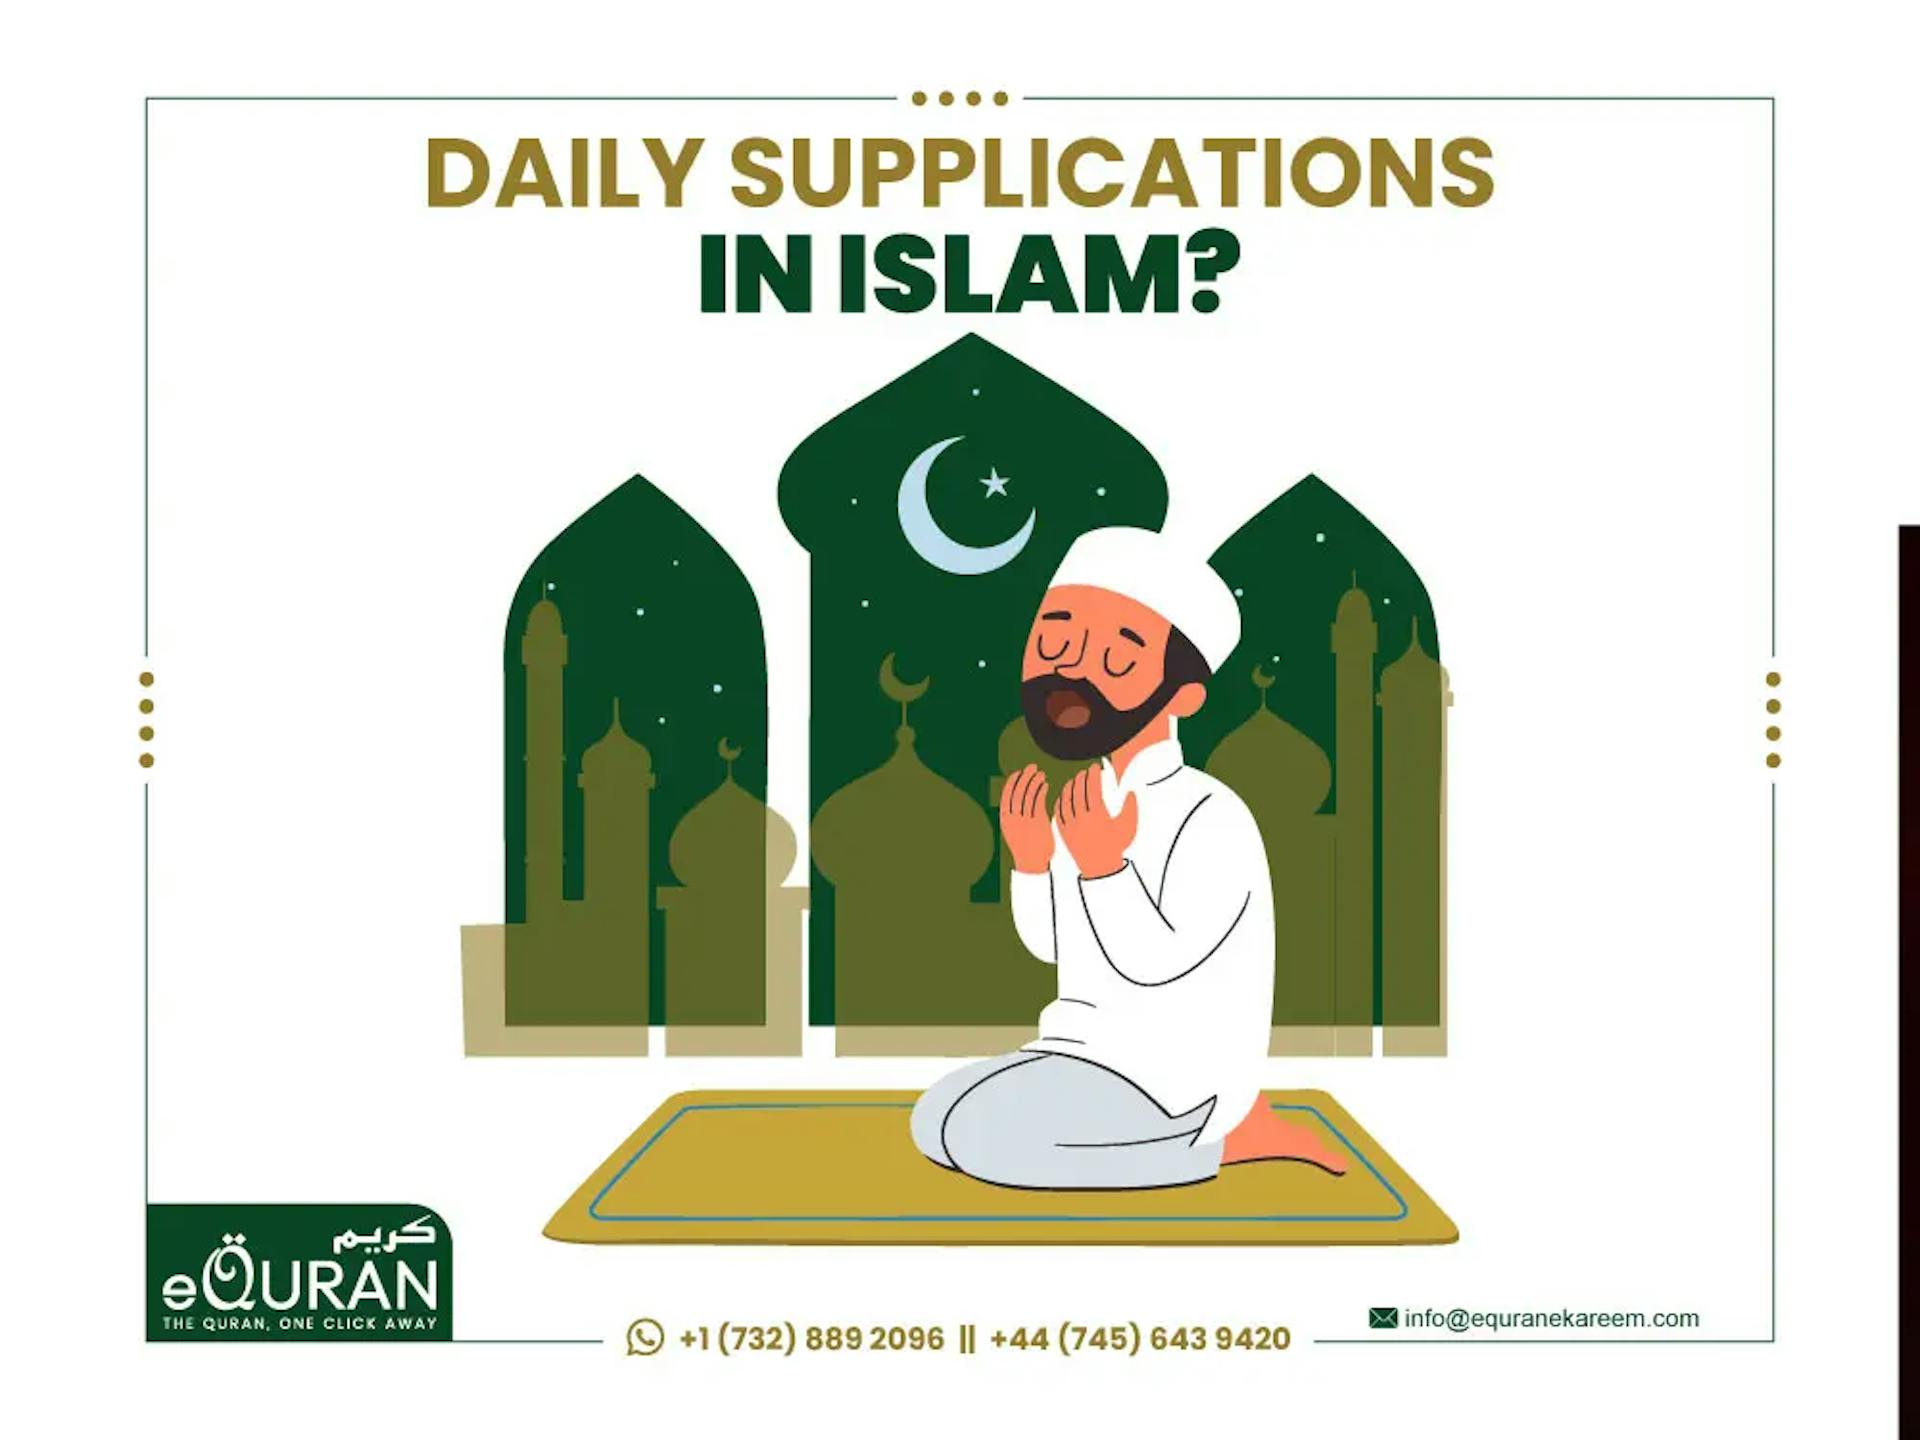 Daily Supplications in Islam